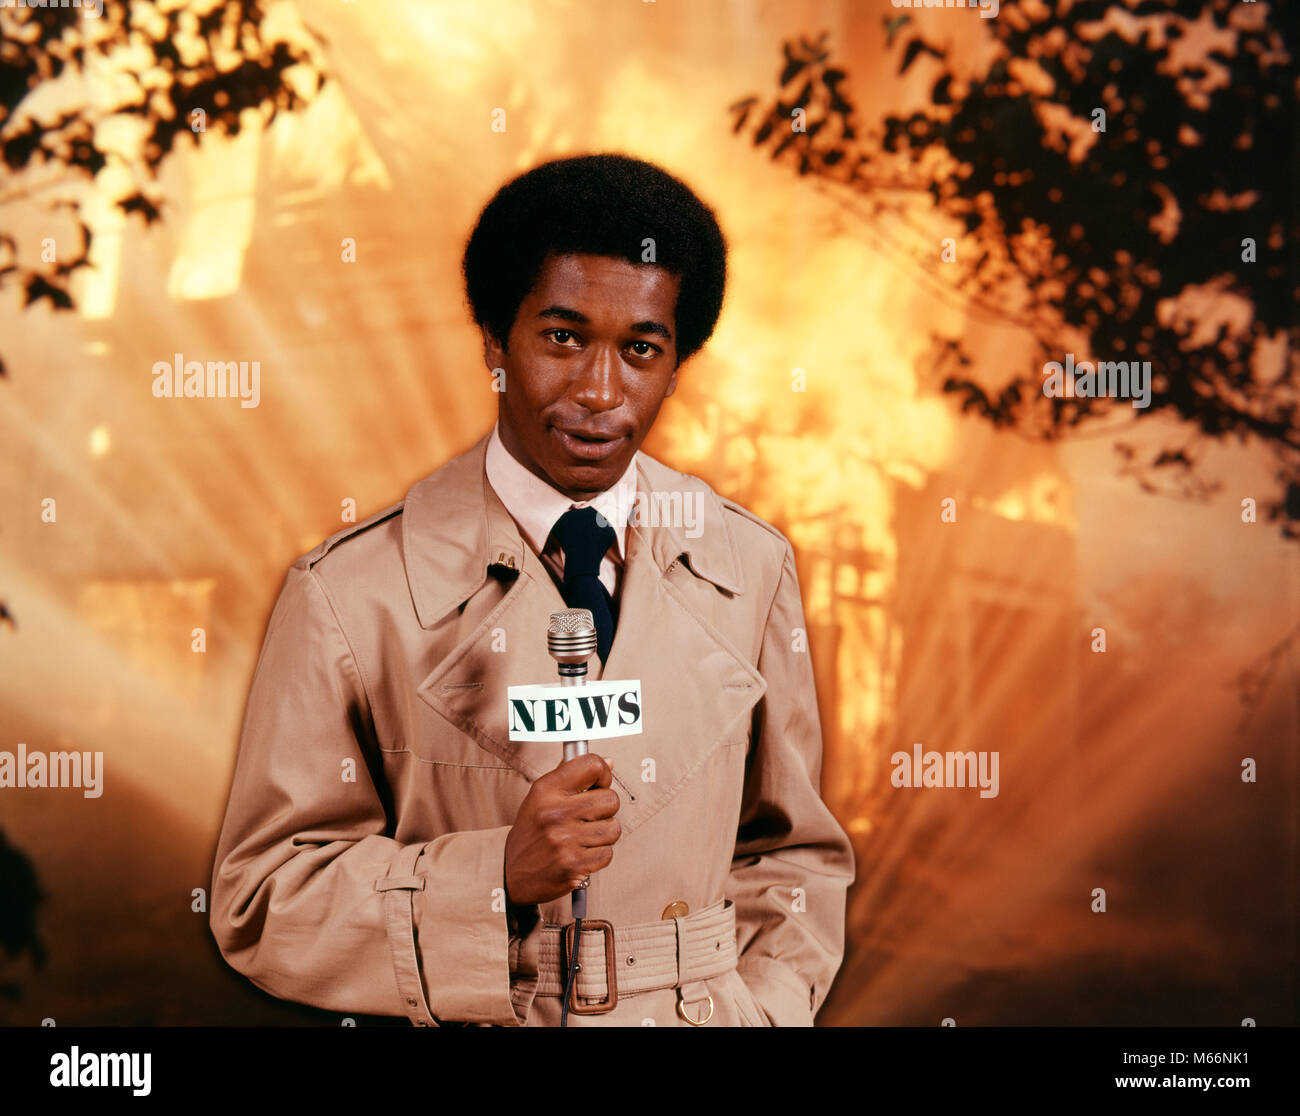 1970s AFRICAN AMERICAN TV NEWSMAN WEARING TRENCH COAT LOOKING AT CAMERA HOLD MICROPHONE REPORTING AT SCENE OF RAGING HOUSE FIRE - kt2188 HAR001 HARS STYLE FEAR COMMUNICATION BURNING CAREER YOUNG ADULT INFORMATION FLAME LIFESTYLE SPEED RAINCOAT HEAT GROWNUP ONE PERSON ONLY COMMUNICATING HALF-LENGTH BURN INSPIRATION GROWN-UP CHARACTER RISK PROFESSION WARM ENTERTAINMENT CONFIDENCE NOSTALGIA EYE CONTACT 20-25 YEARS 25-30 YEARS SUCCESS PERFORMING ARTS OCCUPATION ADVENTURE BROADCASTING STYLES CUSTOMER SERVICE TRENCH AFRICAN-AMERICANS COURAGE AFRICAN-AMERICAN CAREERS EXCITEMENT KNOWLEDGE ETHNIC BLACK Stock Photo